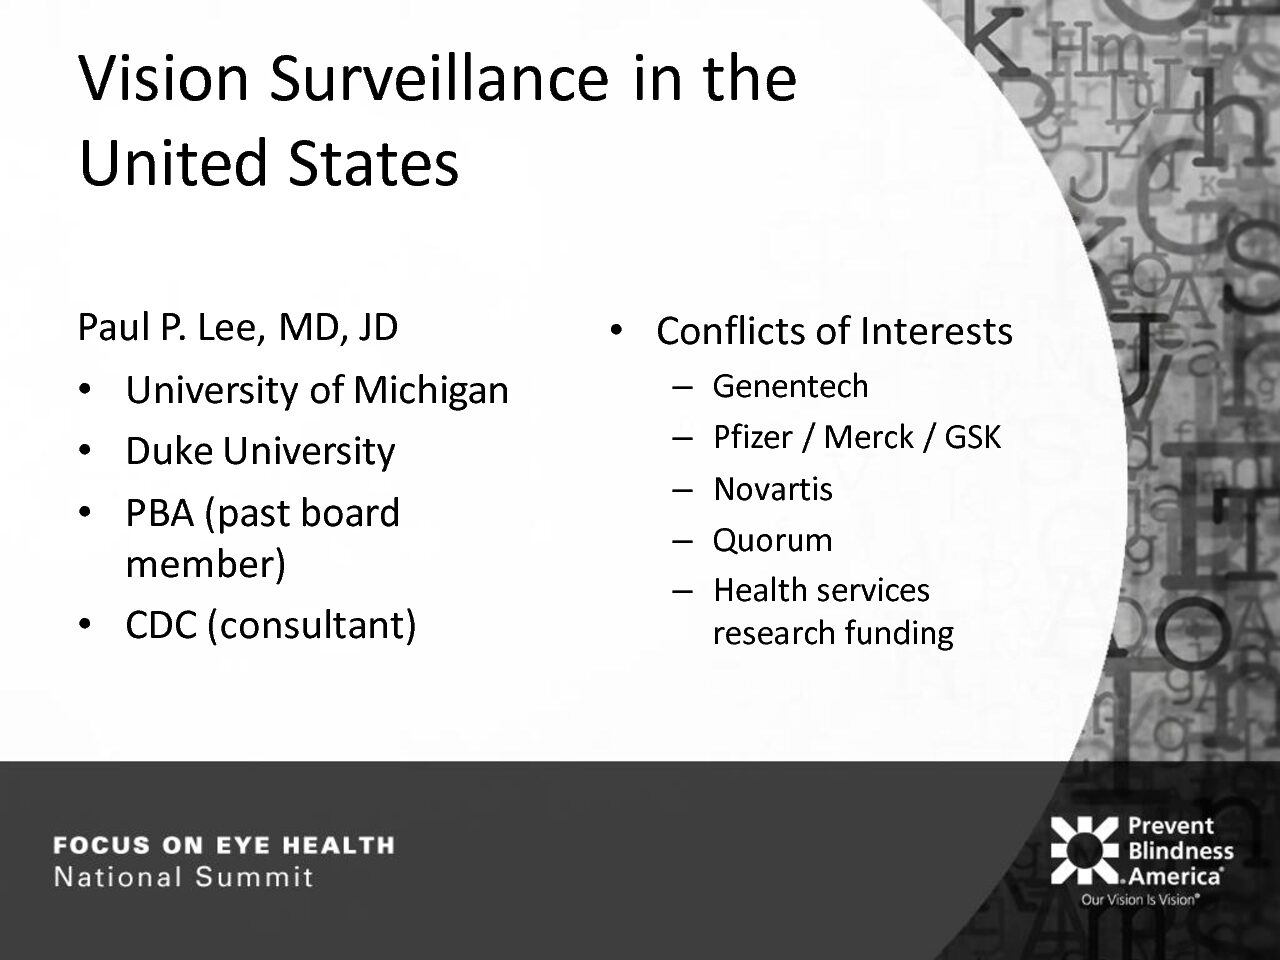 Vision Surveillance in the United States